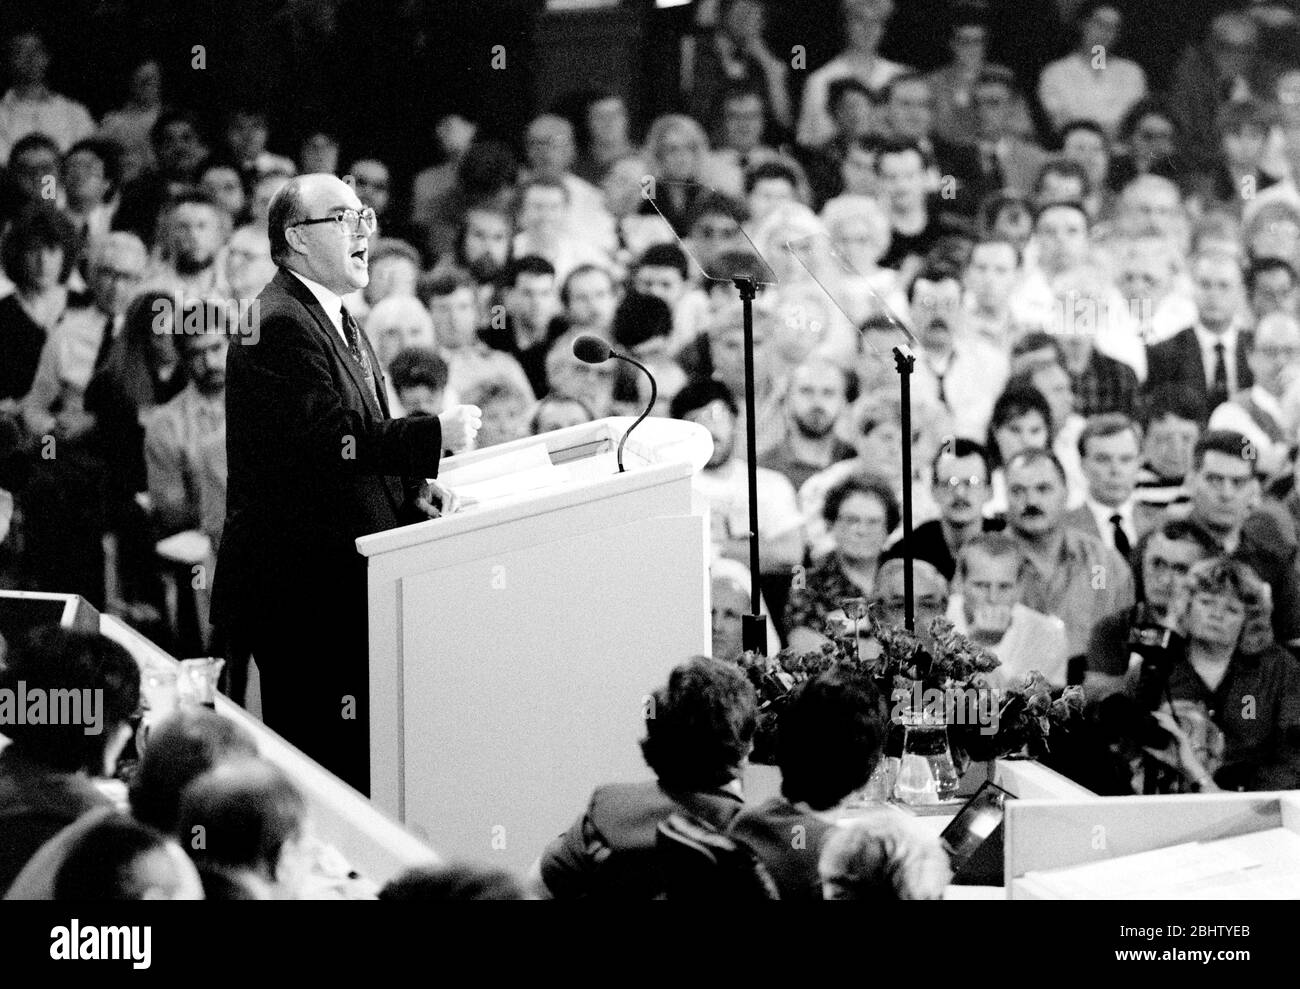 John Smith, leader of the Labour Party, gives his closing speech to the Labour Conference in the Winter Gardens, Blackpool, UK, 1992 Stock Photo